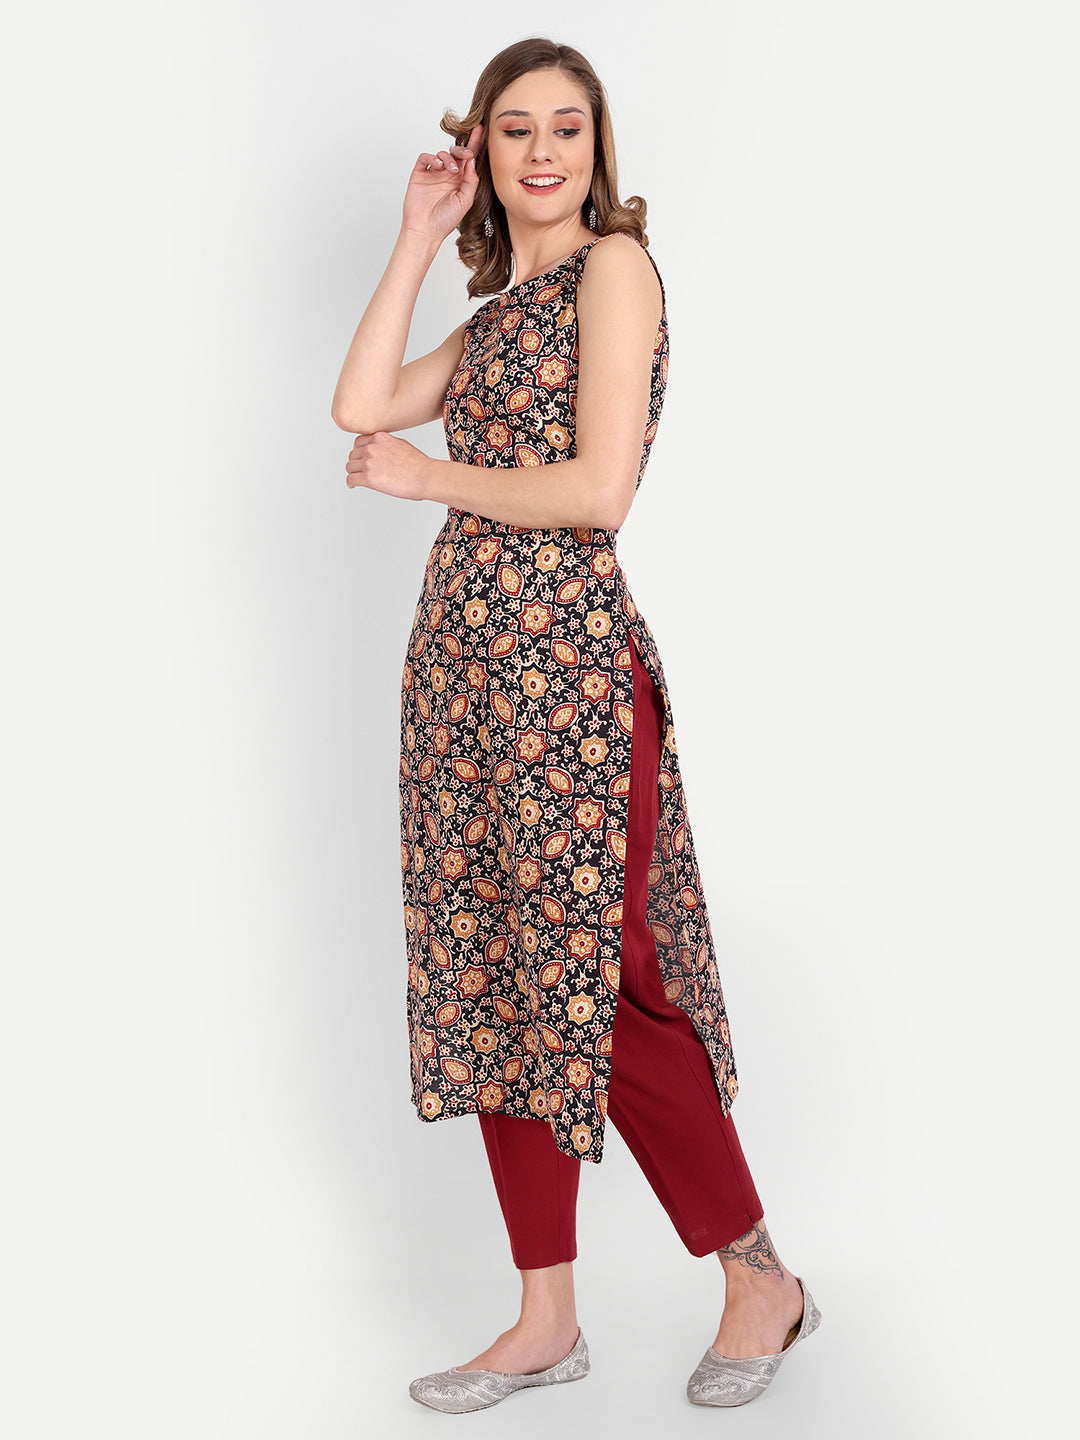 Look summer ready in sleeveless kurta with pants | HT Shop Now